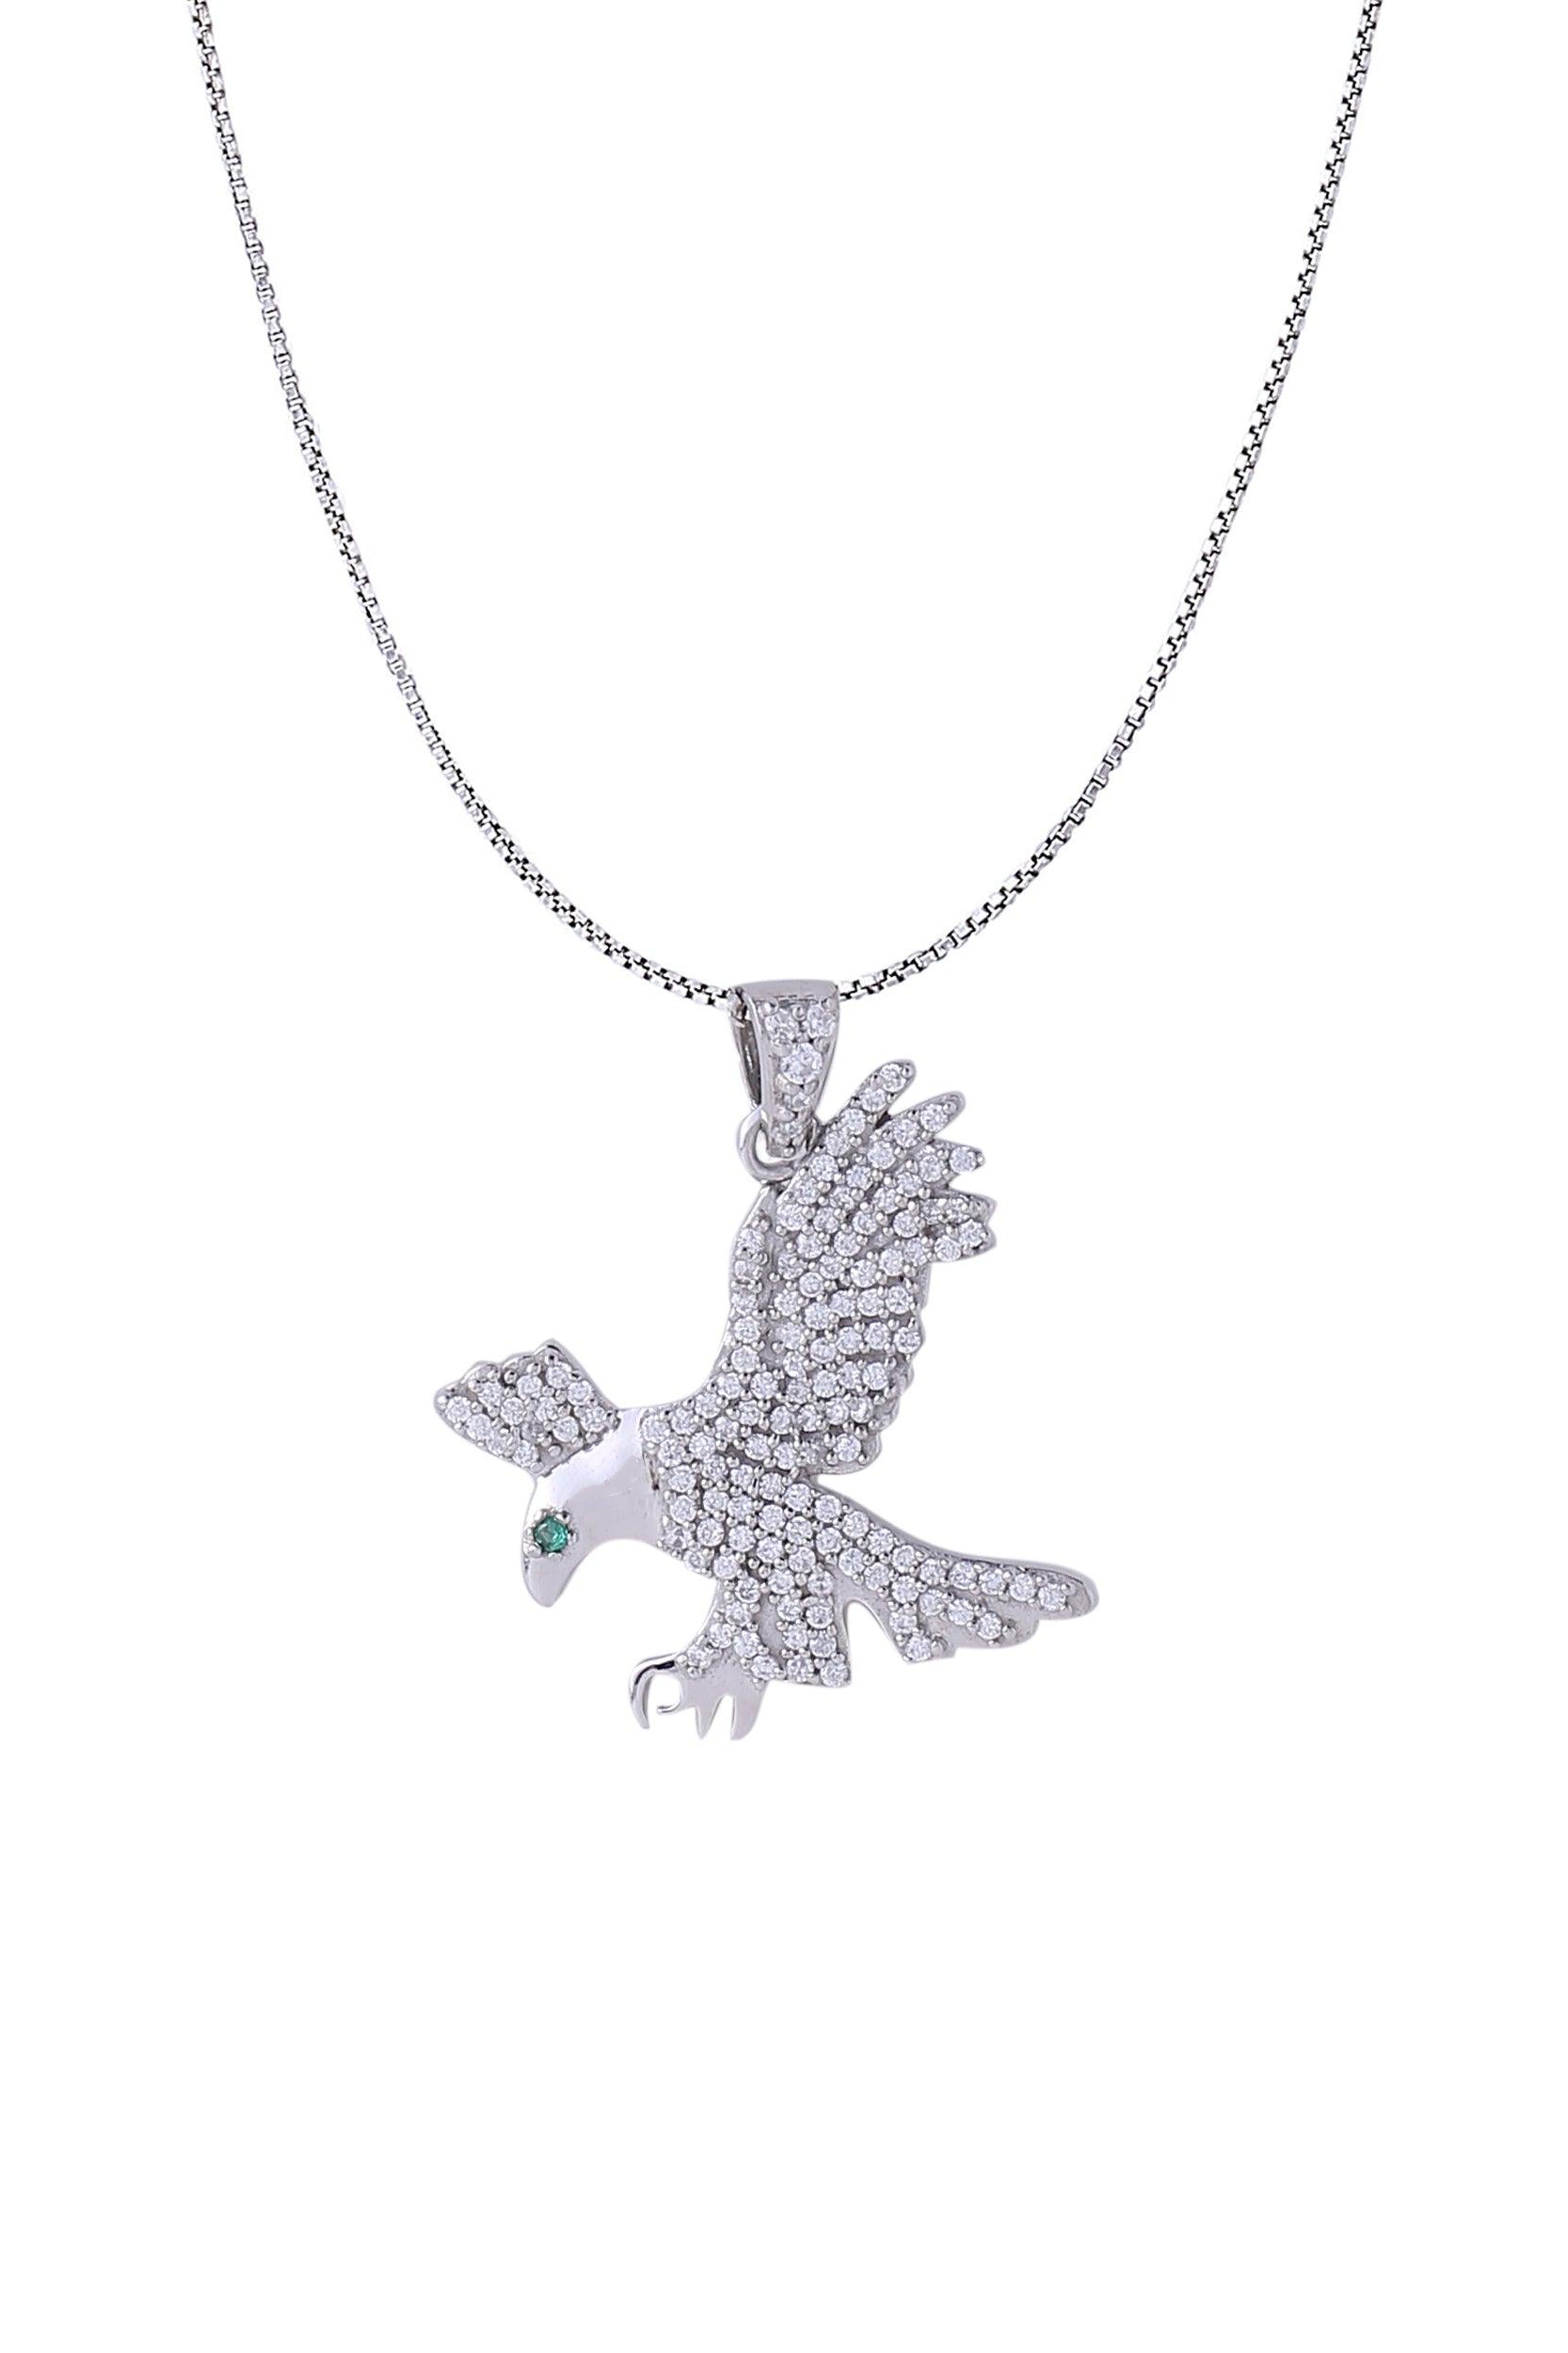 White Gold Color Eagle Pendant Made of 925 Sterling Silver Material with 20 Inch Long Silver Chain